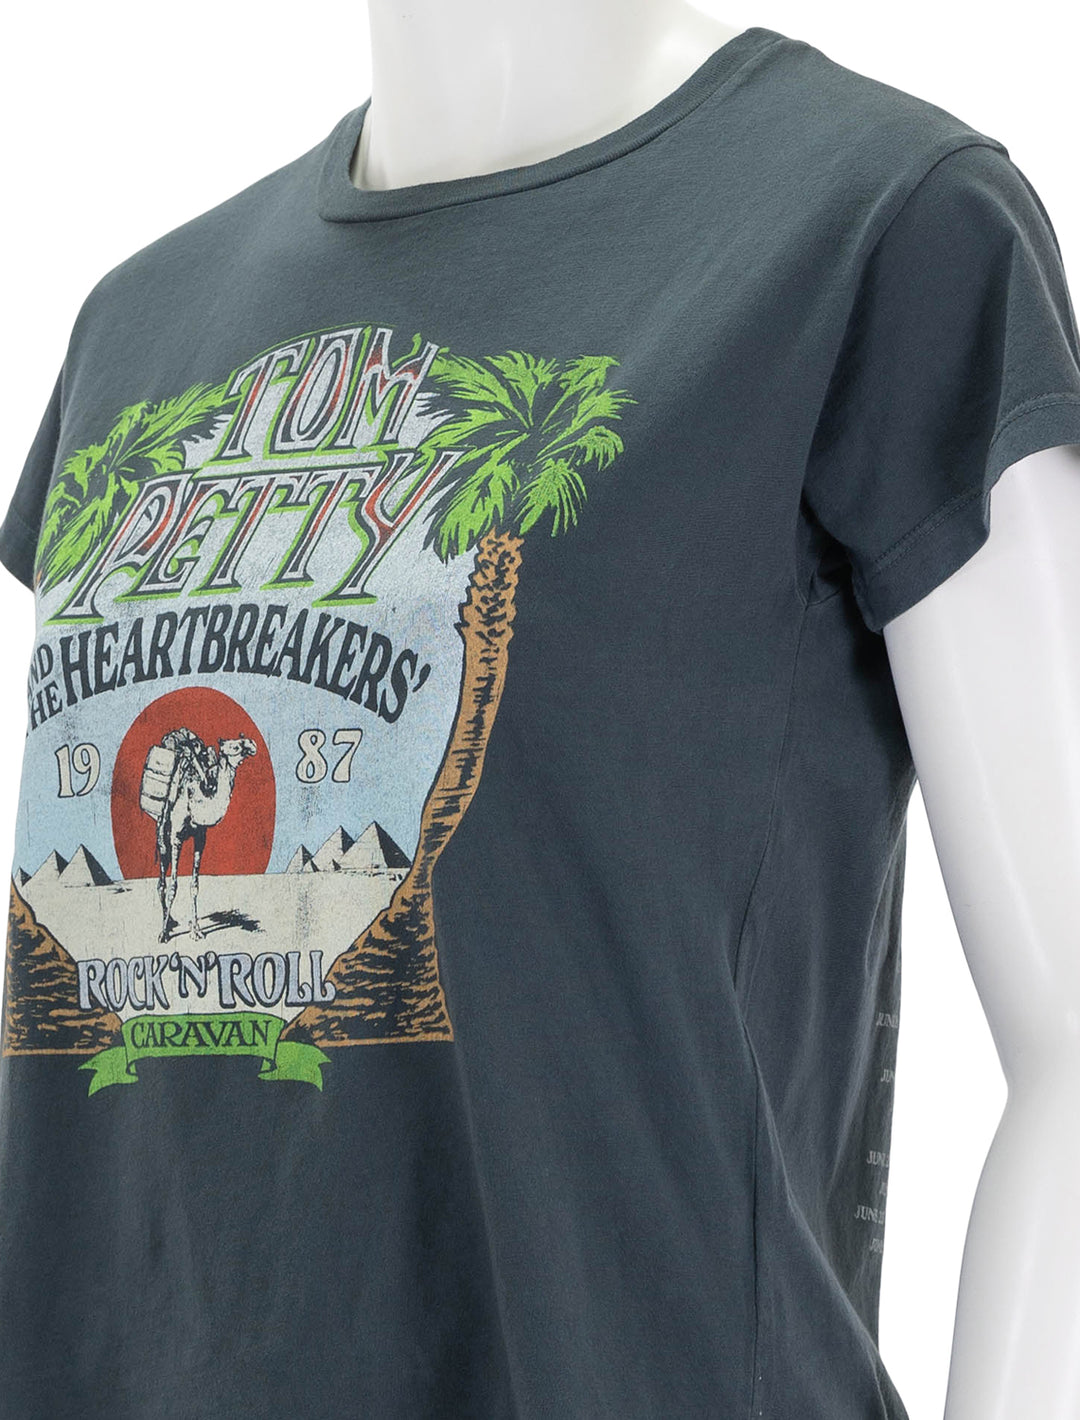 Close-up view of Daydreamer's tom petty rock n roll caravan solo tee.